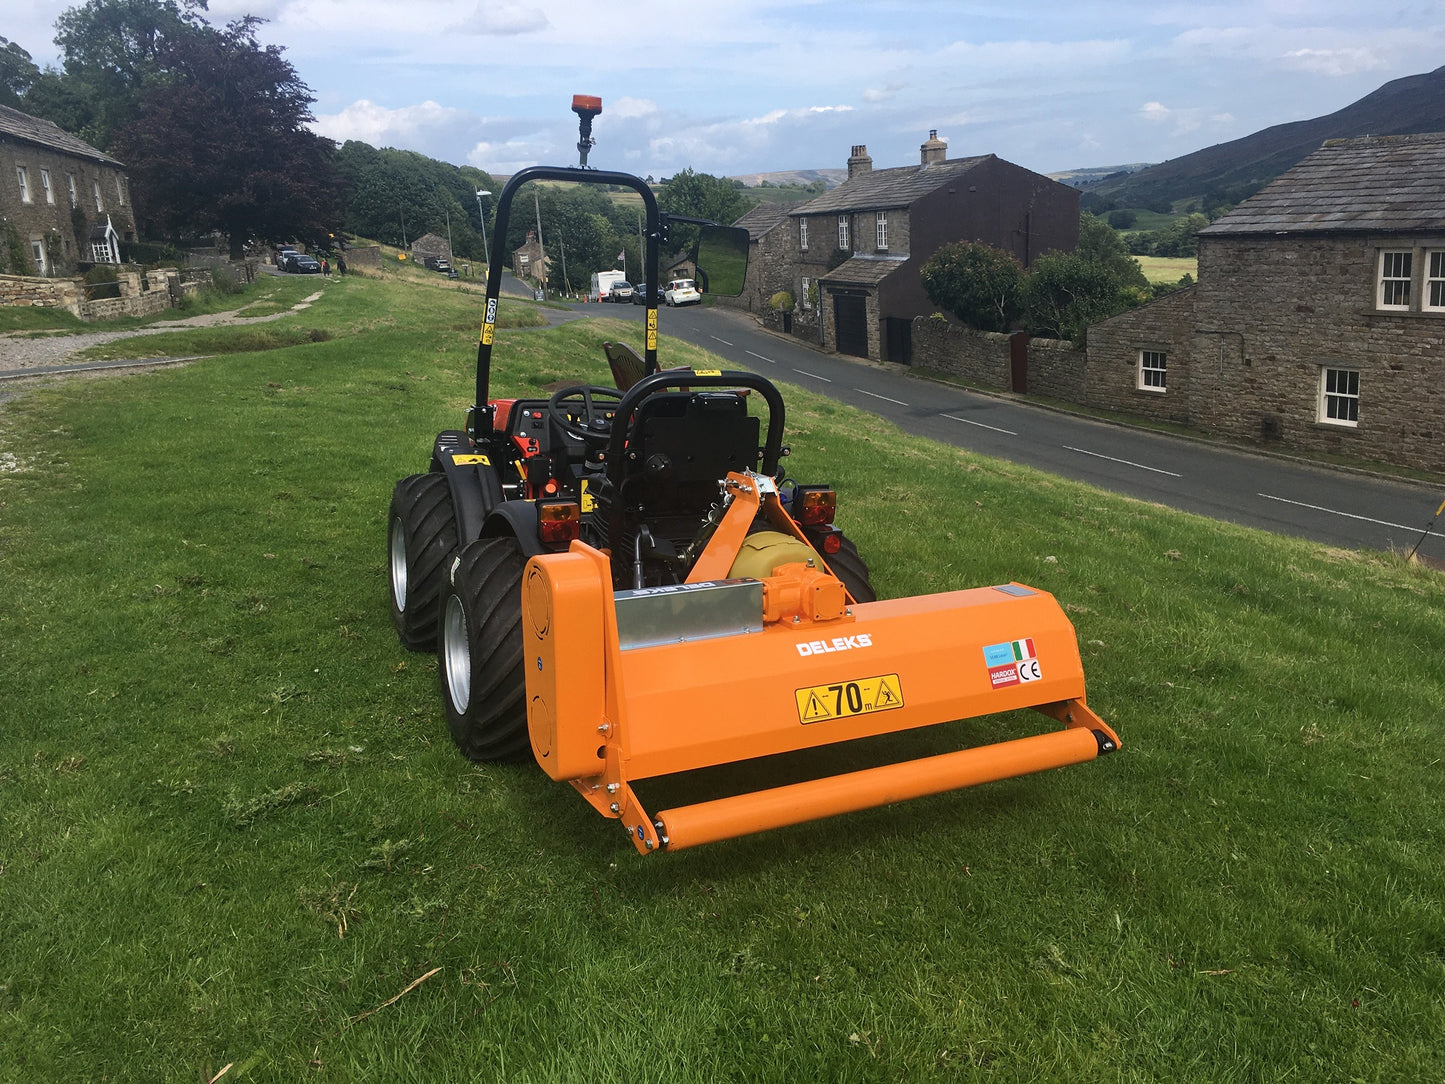 Deleks APE Flail Mowers for Compact Tractors